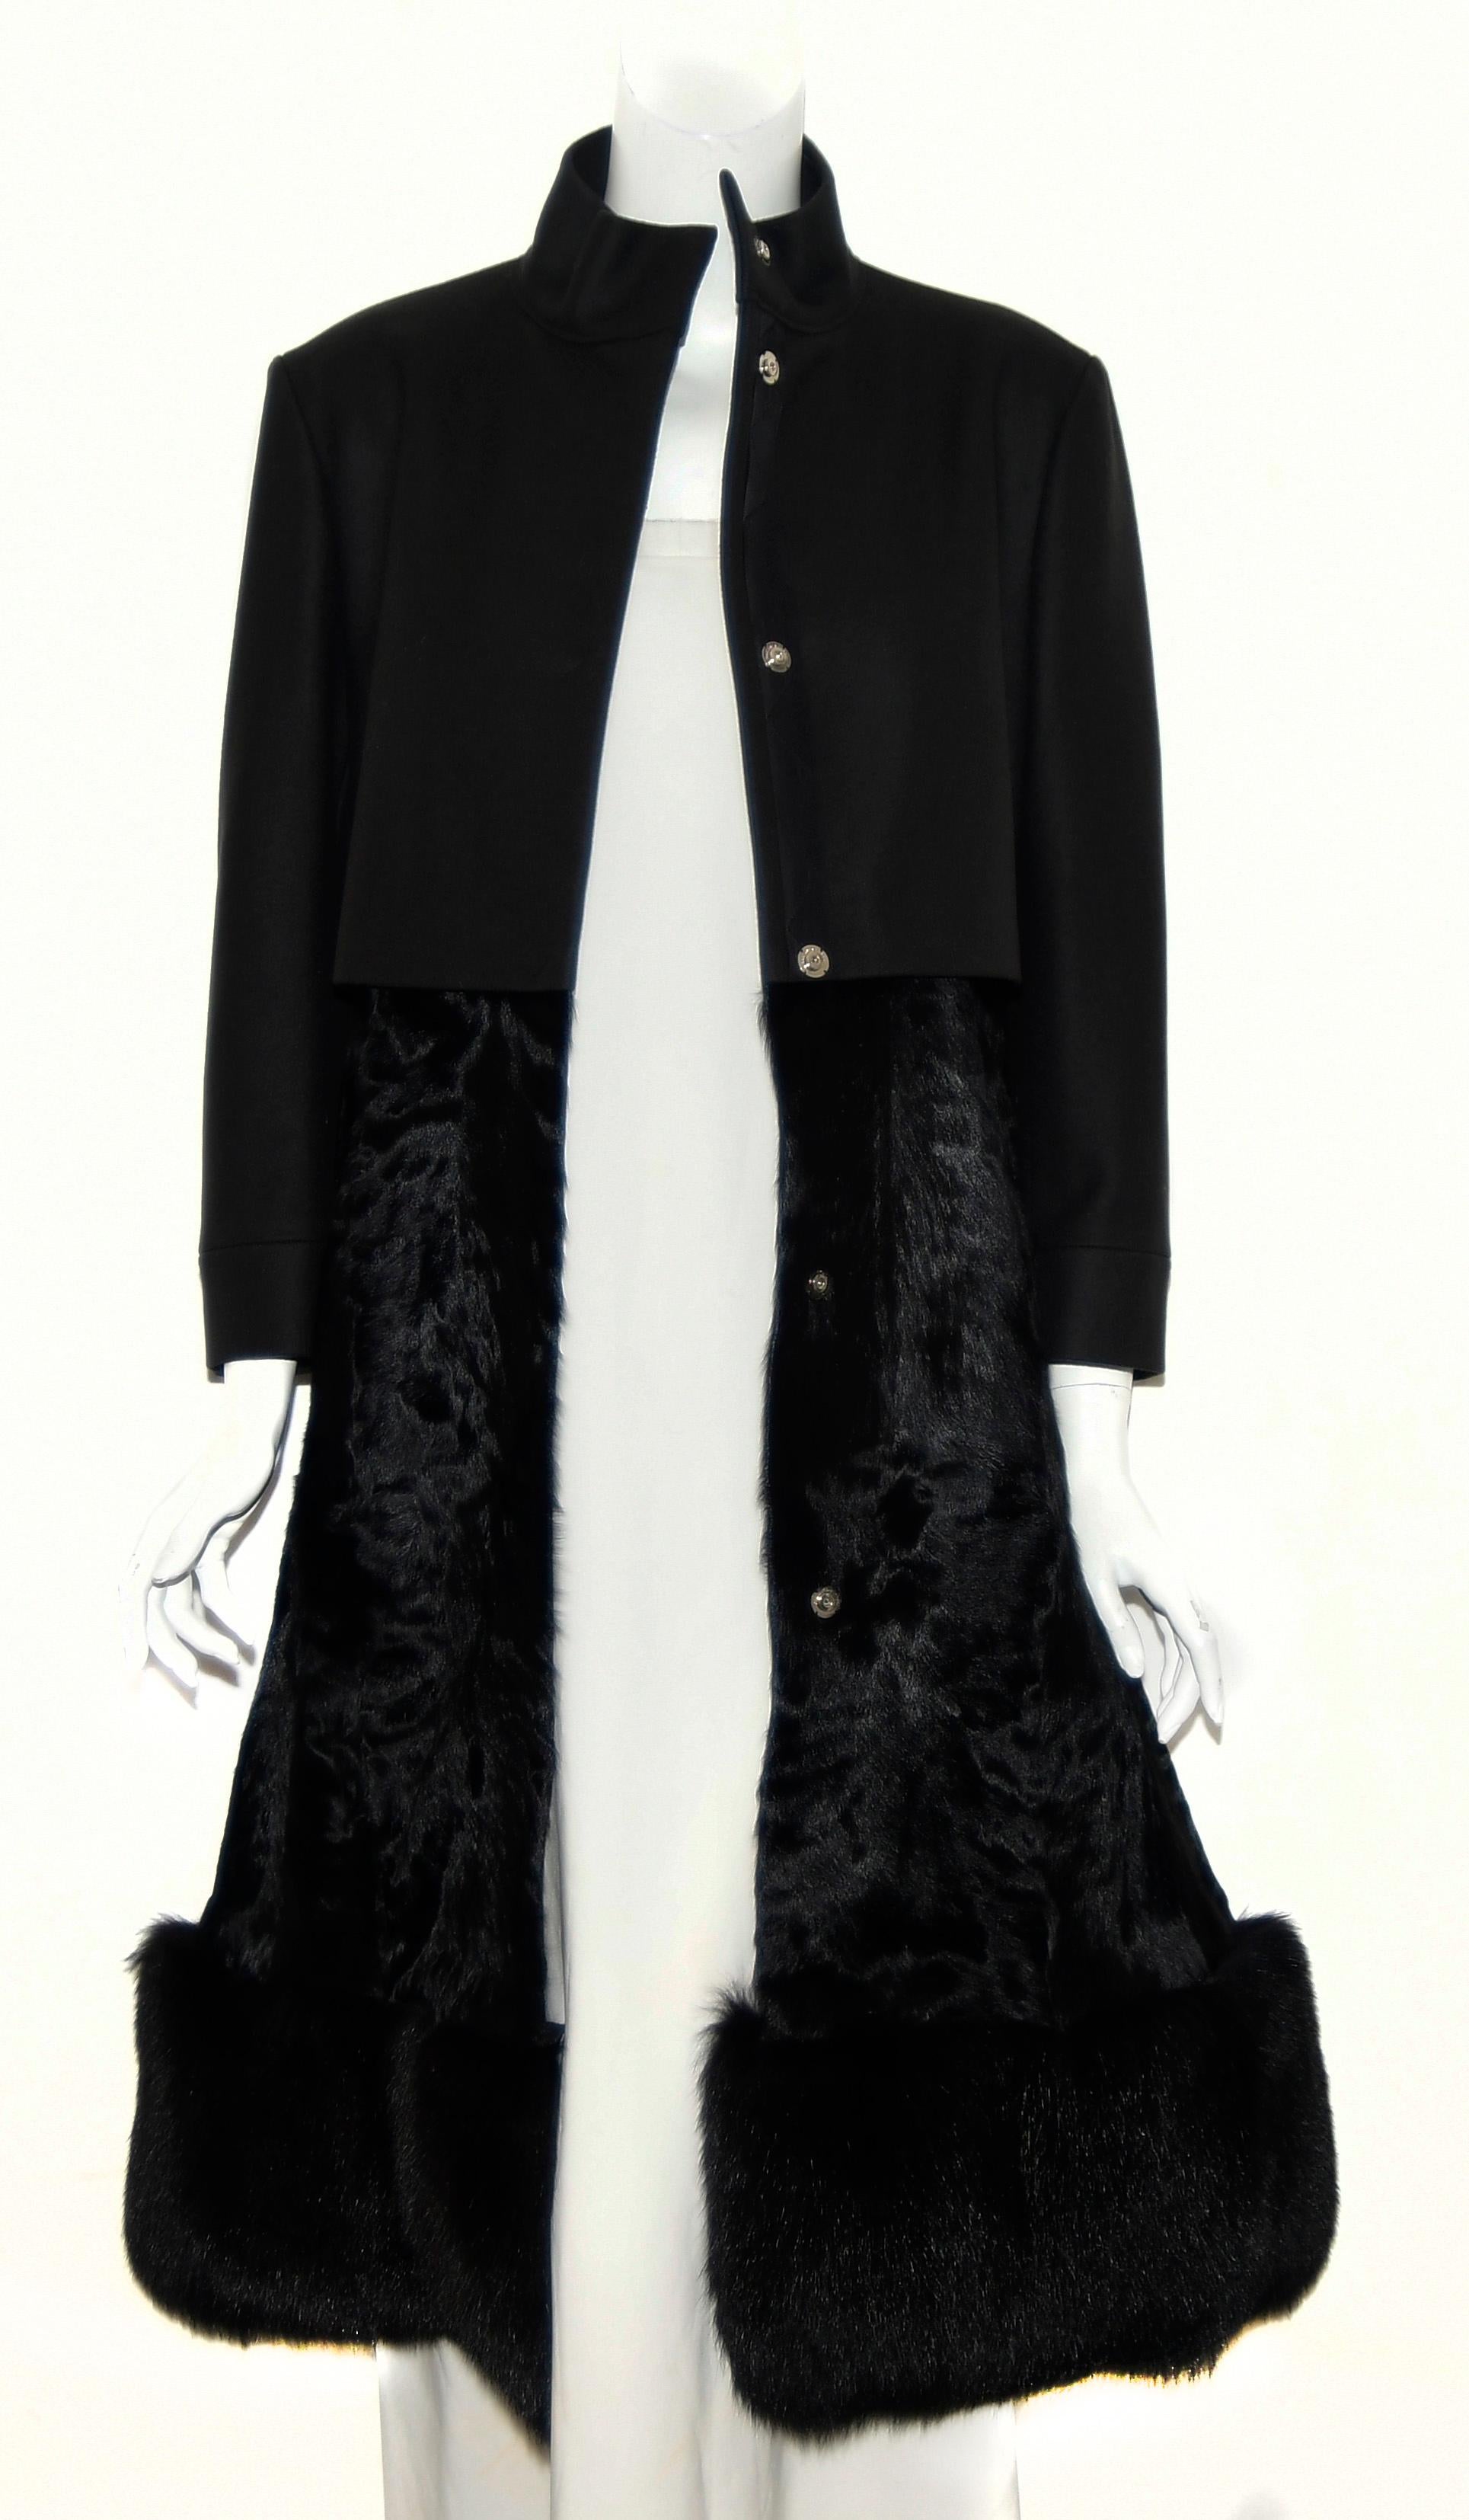 Costume National wool and cashmere coat is a stunning garment that combines fox and goat fur to create a masterpiece.  The top of the coat gives the appearance of a cropped jacket with the bottom of coat the front and back covered in goat (kid) fur.